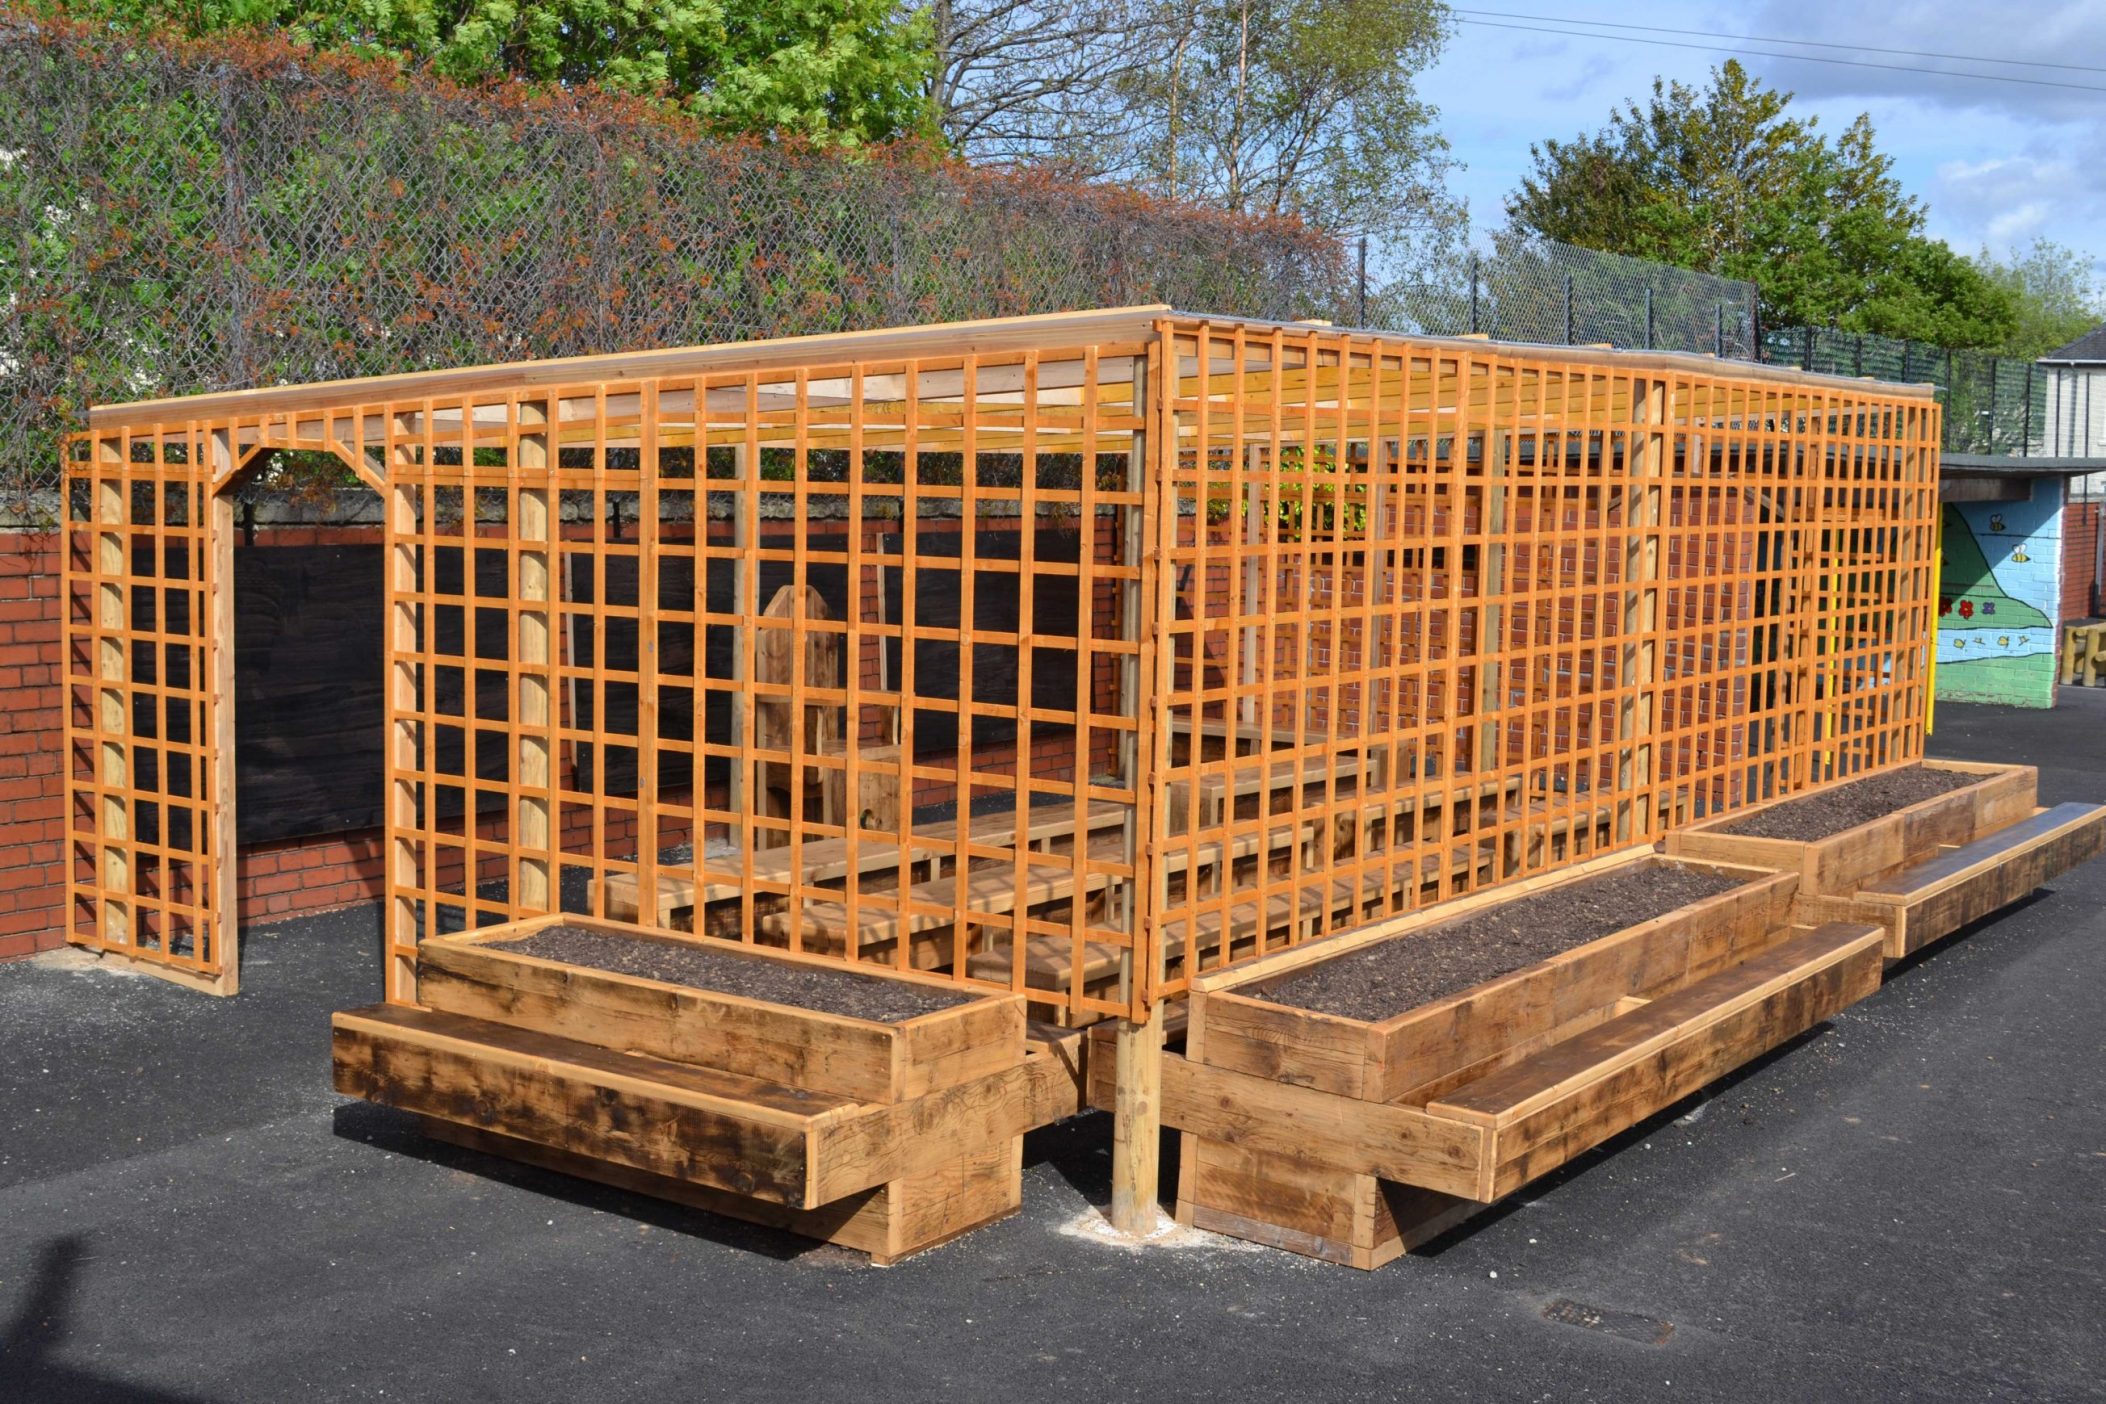 Outdoor classroom made with reclaimed wood with seated planters and trellis